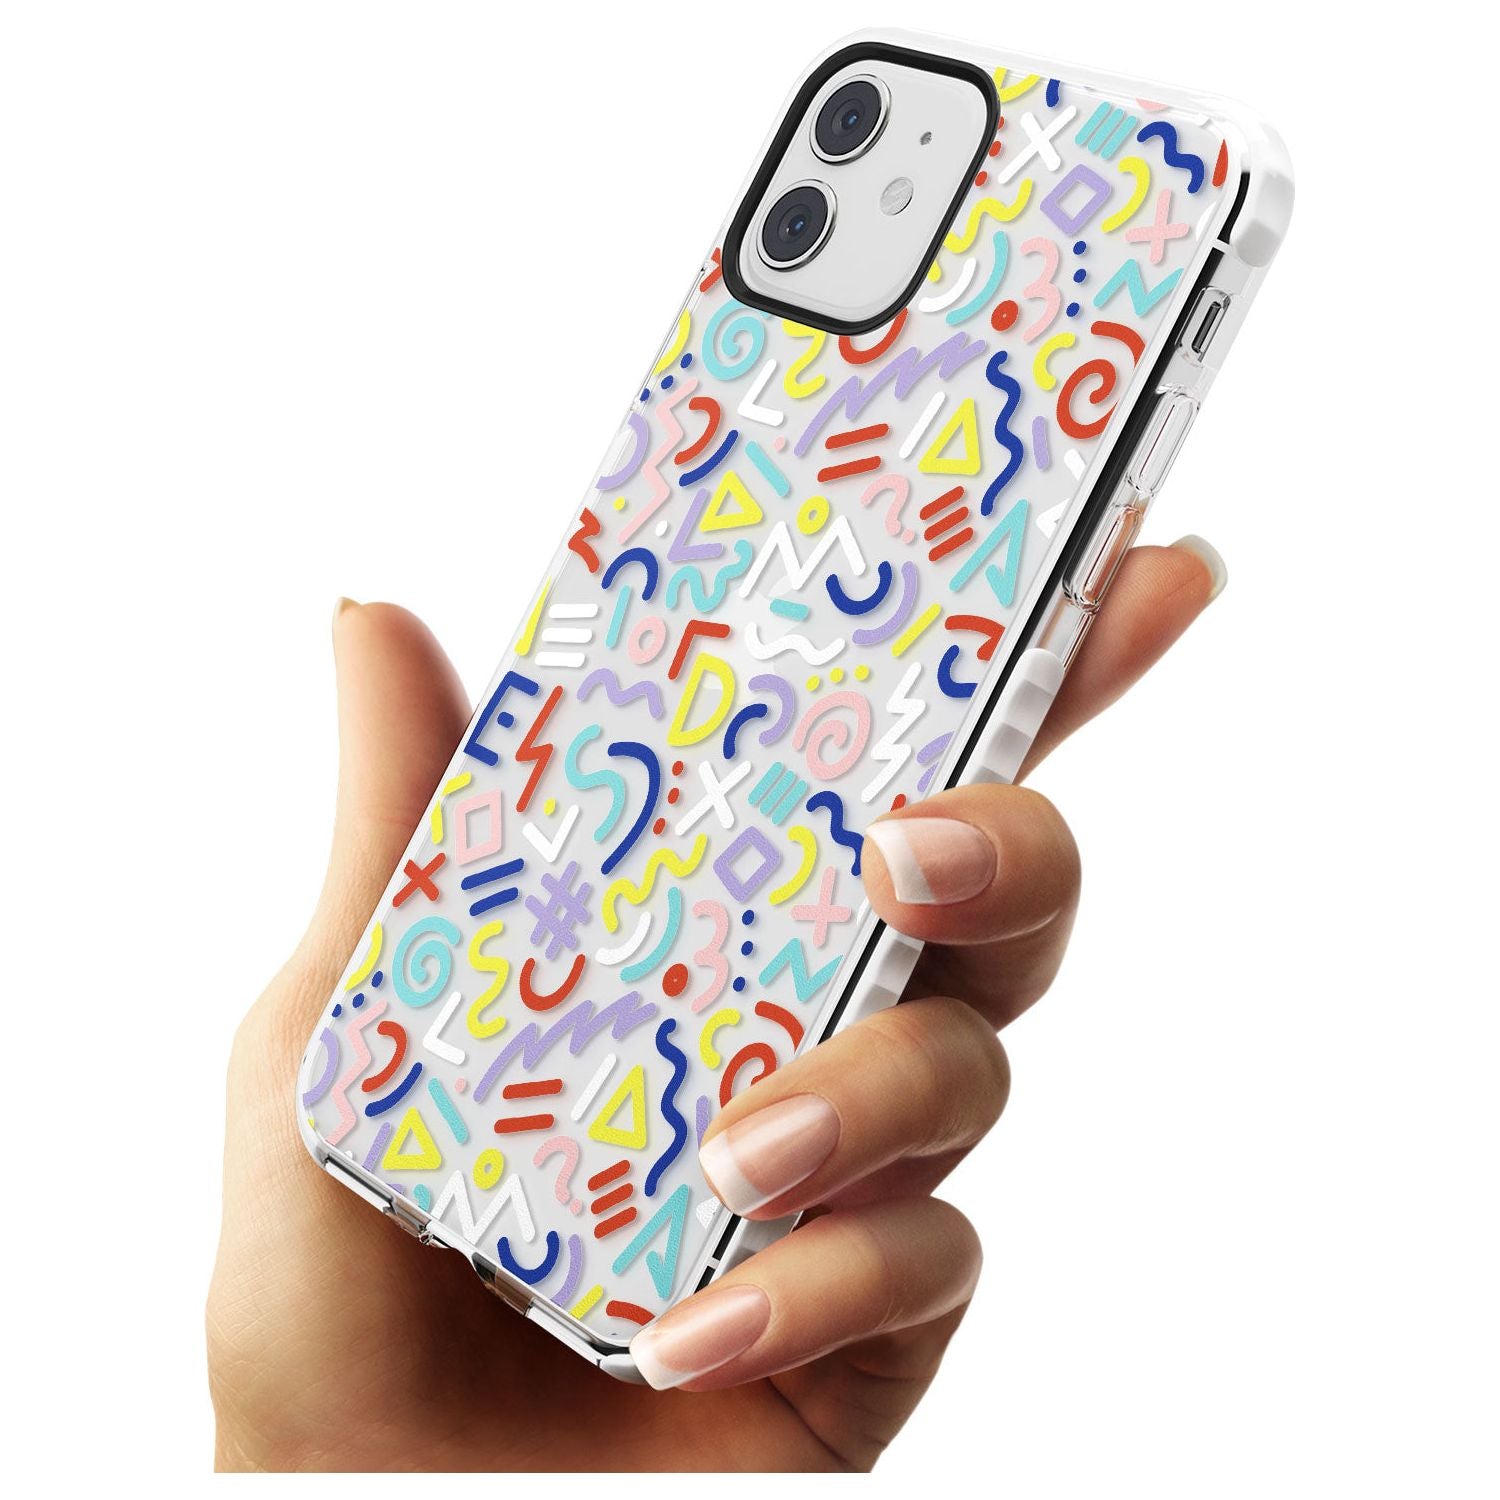 Colourful Mixed Shapes Retro Pattern Design Impact Phone Case for iPhone 11